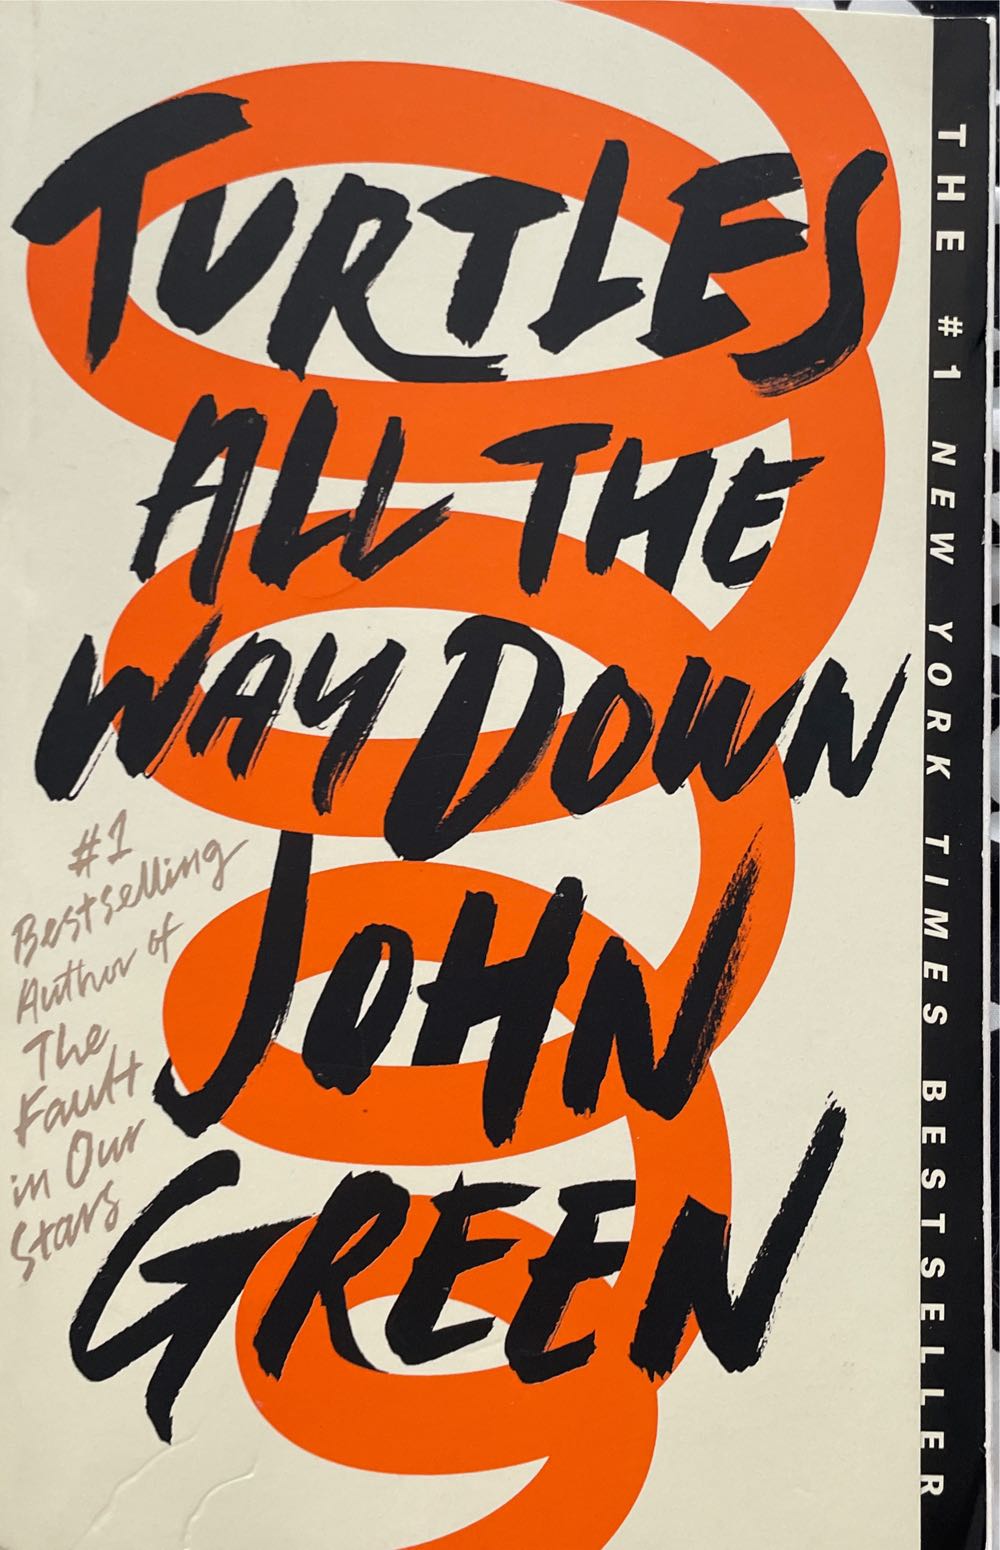 Turtles All The Way Down - John Green (Penguin Books, an imprint of Penguin Random House LLC - Paperback) book collectible [Barcode 9780525555377] - Main Image 2